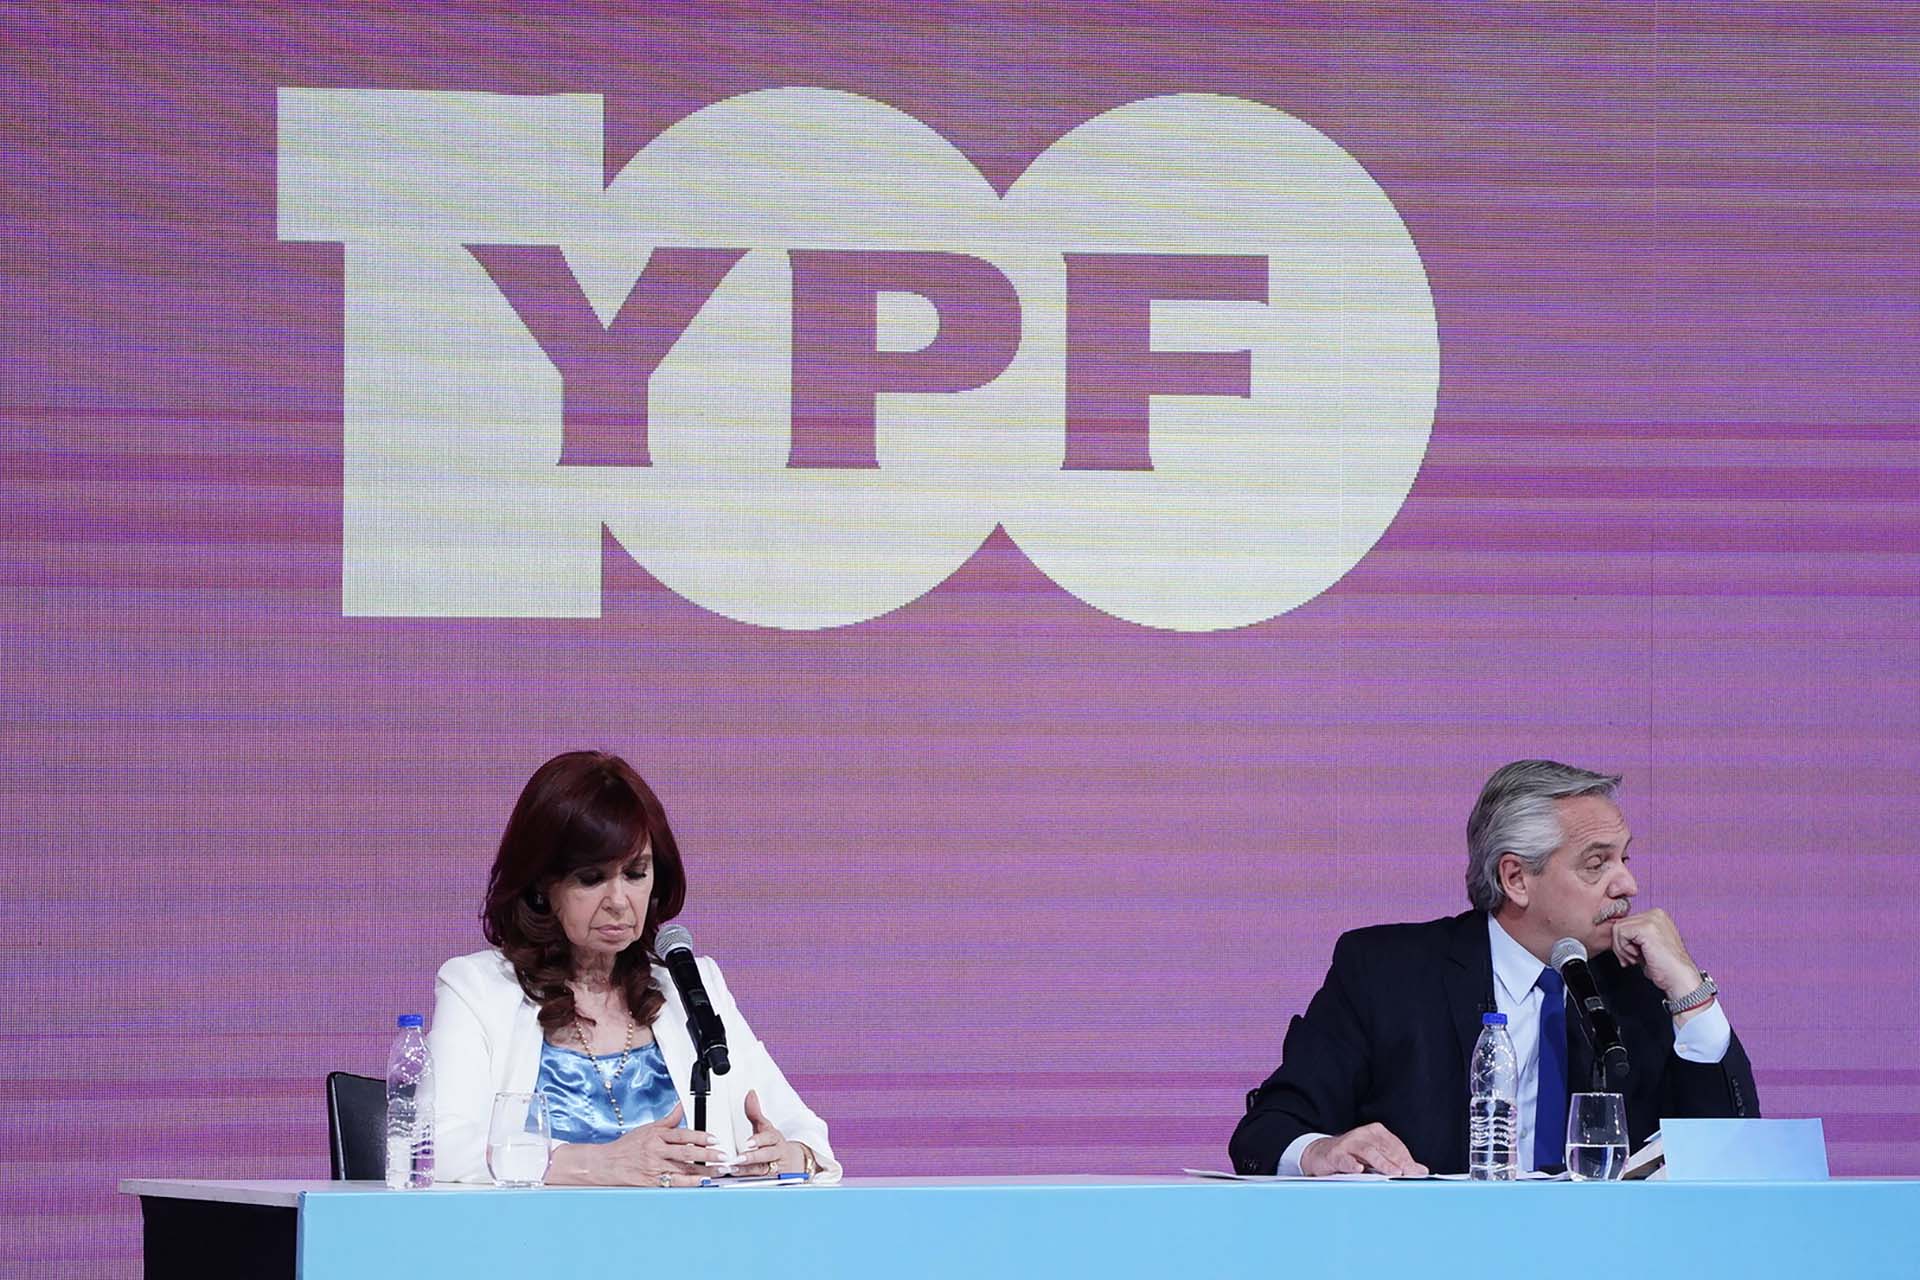 Cristina Kirchner and Alberto Fernández during the act for the 100 years of YPF (Franco Fafasuli)